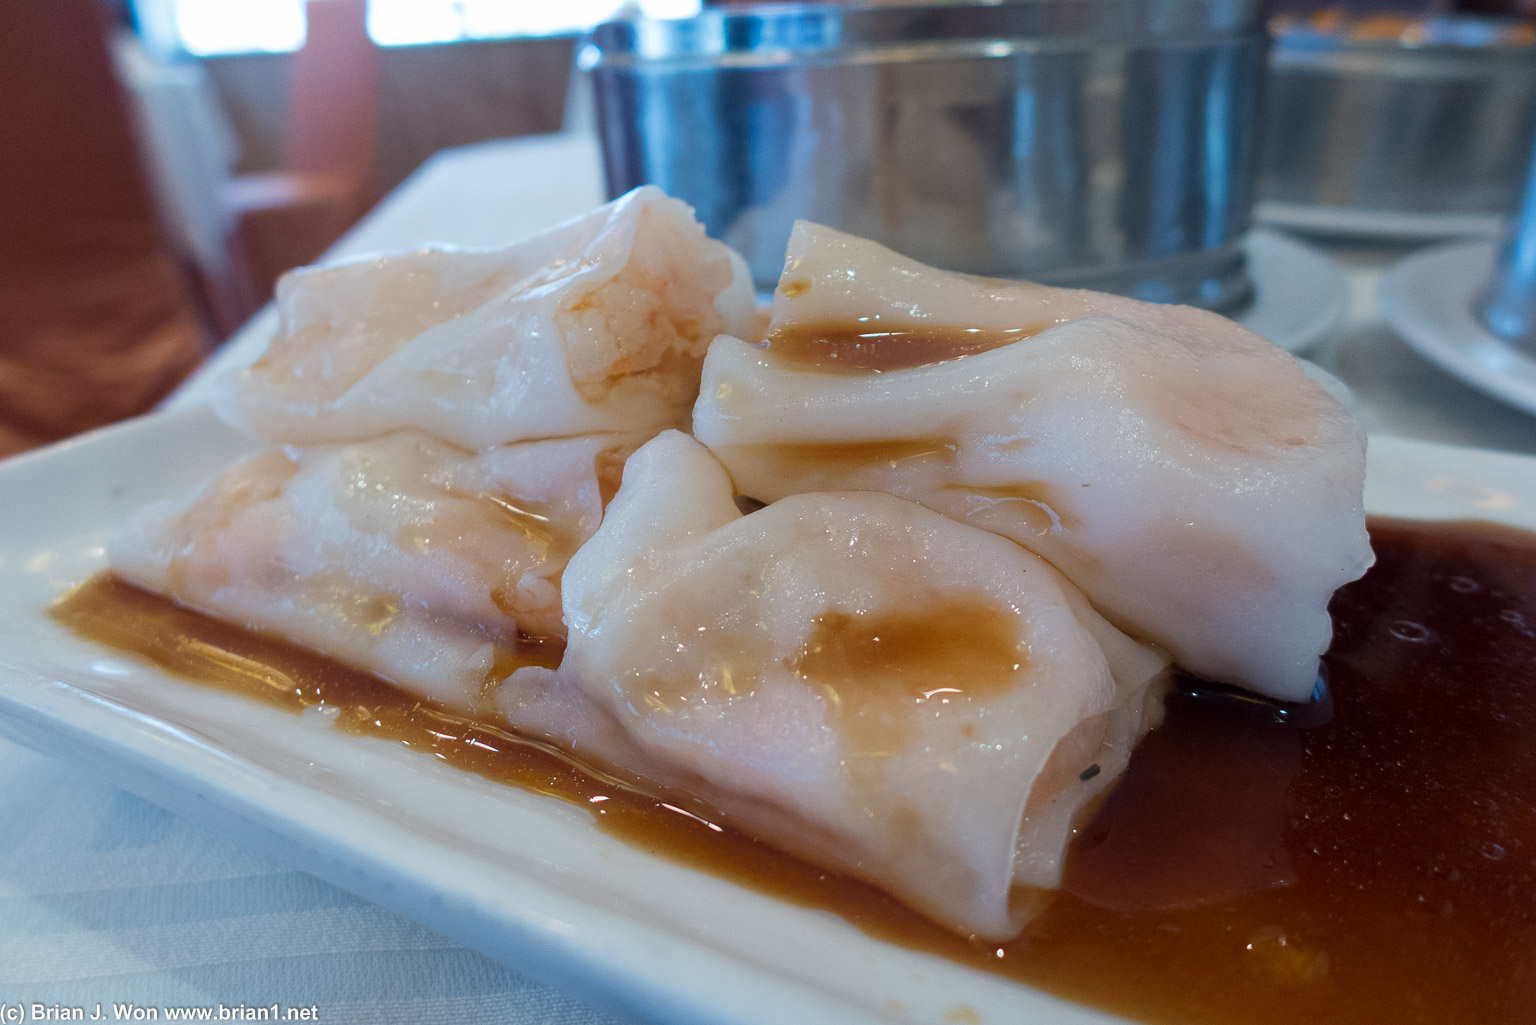 Har cheung fun. Quite good, although the cut-in-the-middle meant bits of shrimp kept falling out.